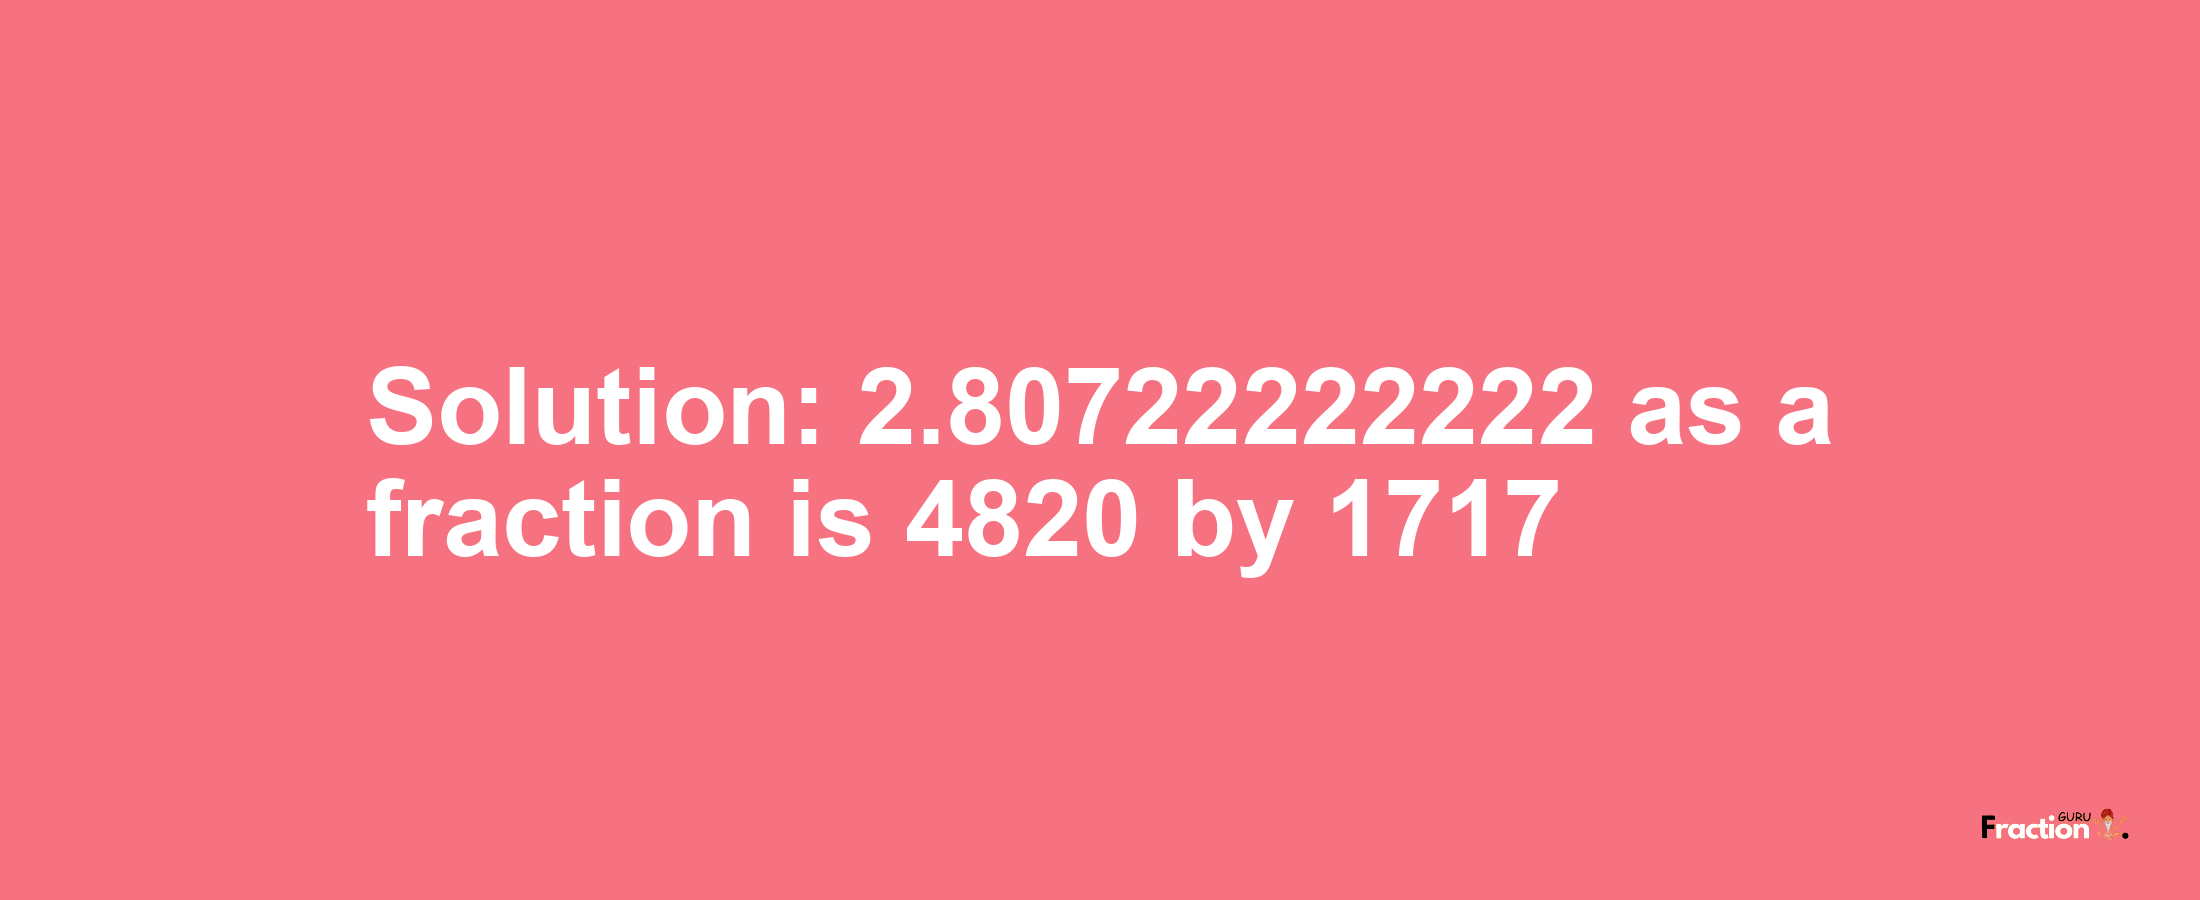 Solution:2.80722222222 as a fraction is 4820/1717